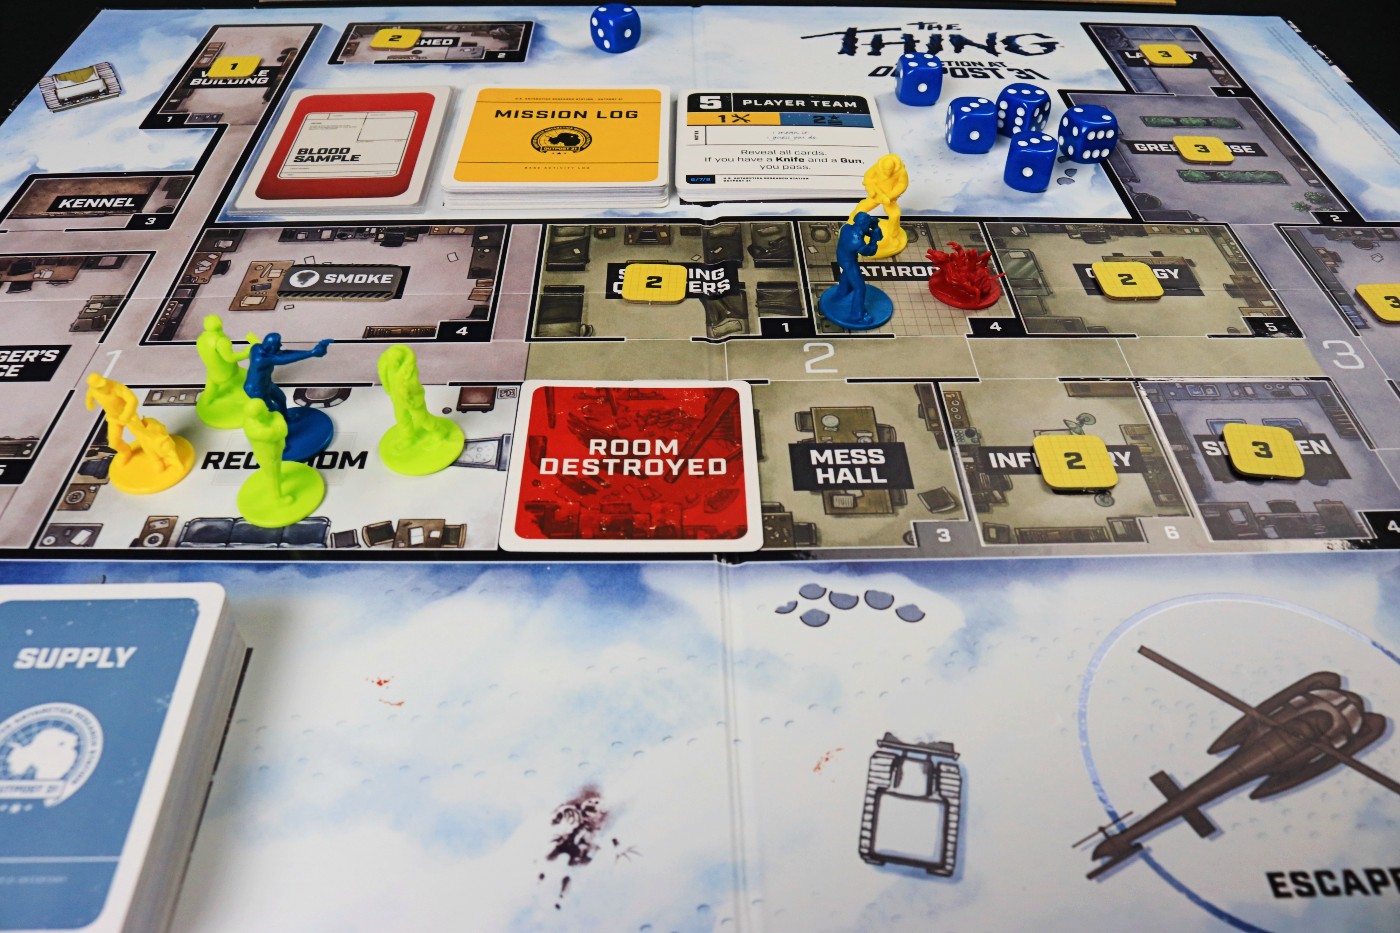 The Thing: Infection at Outpost 31 full board